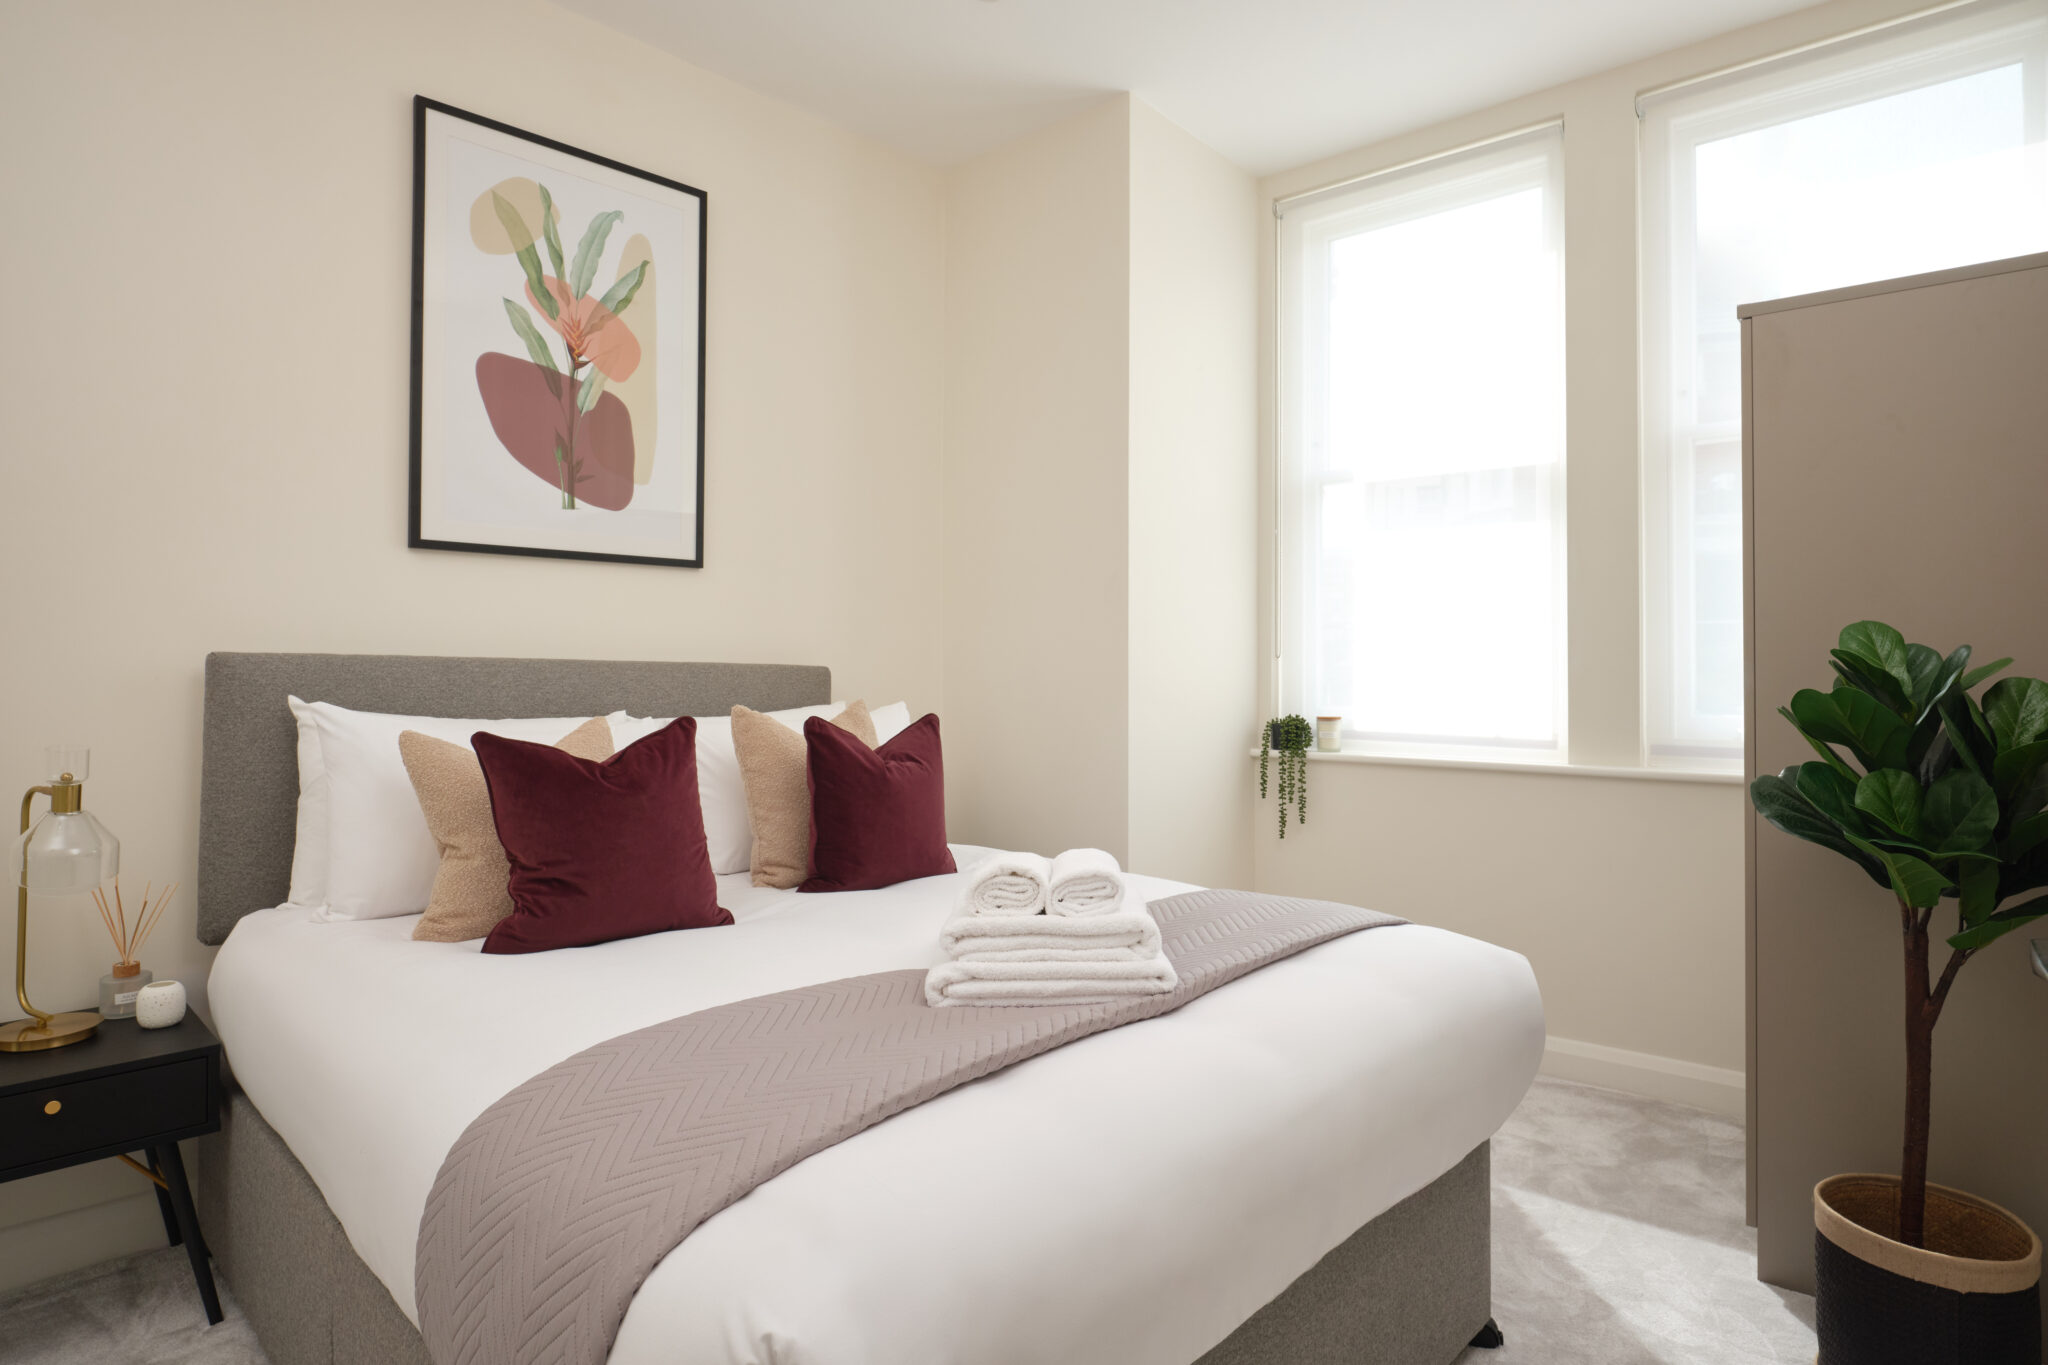 Gooch House Apartments - West London Serviced Apartments - London | Urban Stay